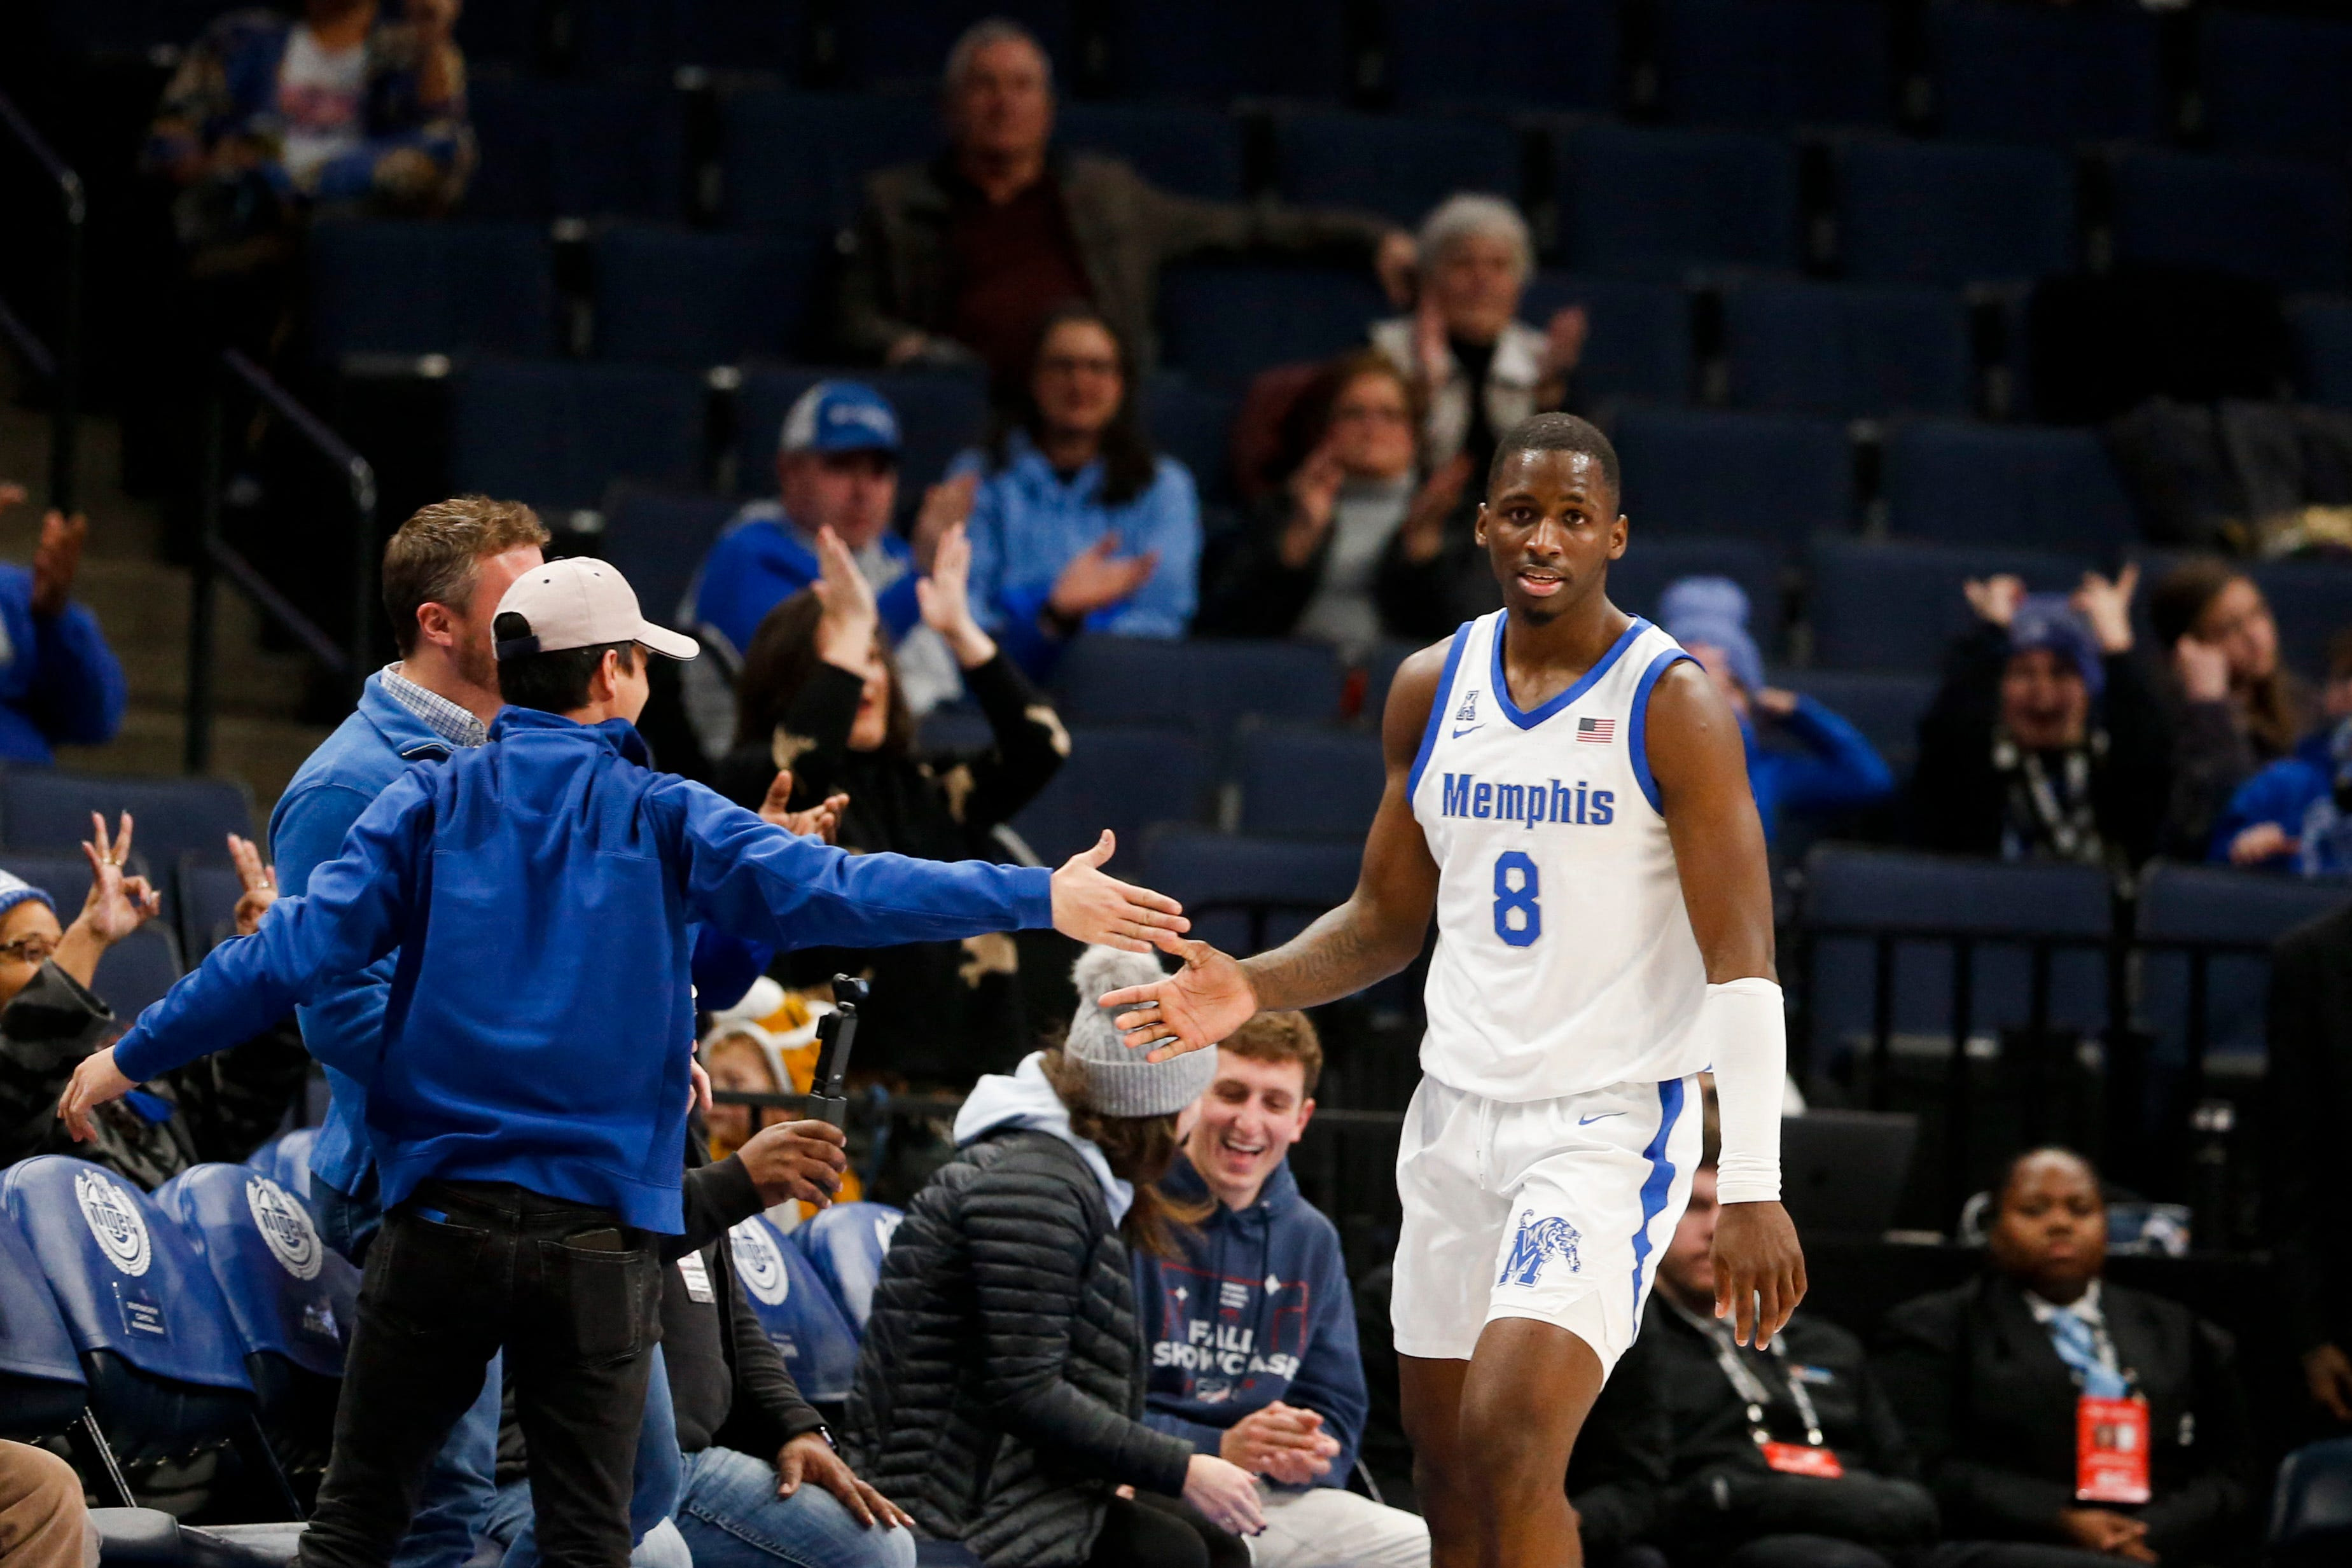 College Basketball: Memphis Tigers blow 20 point lead, lose to USF